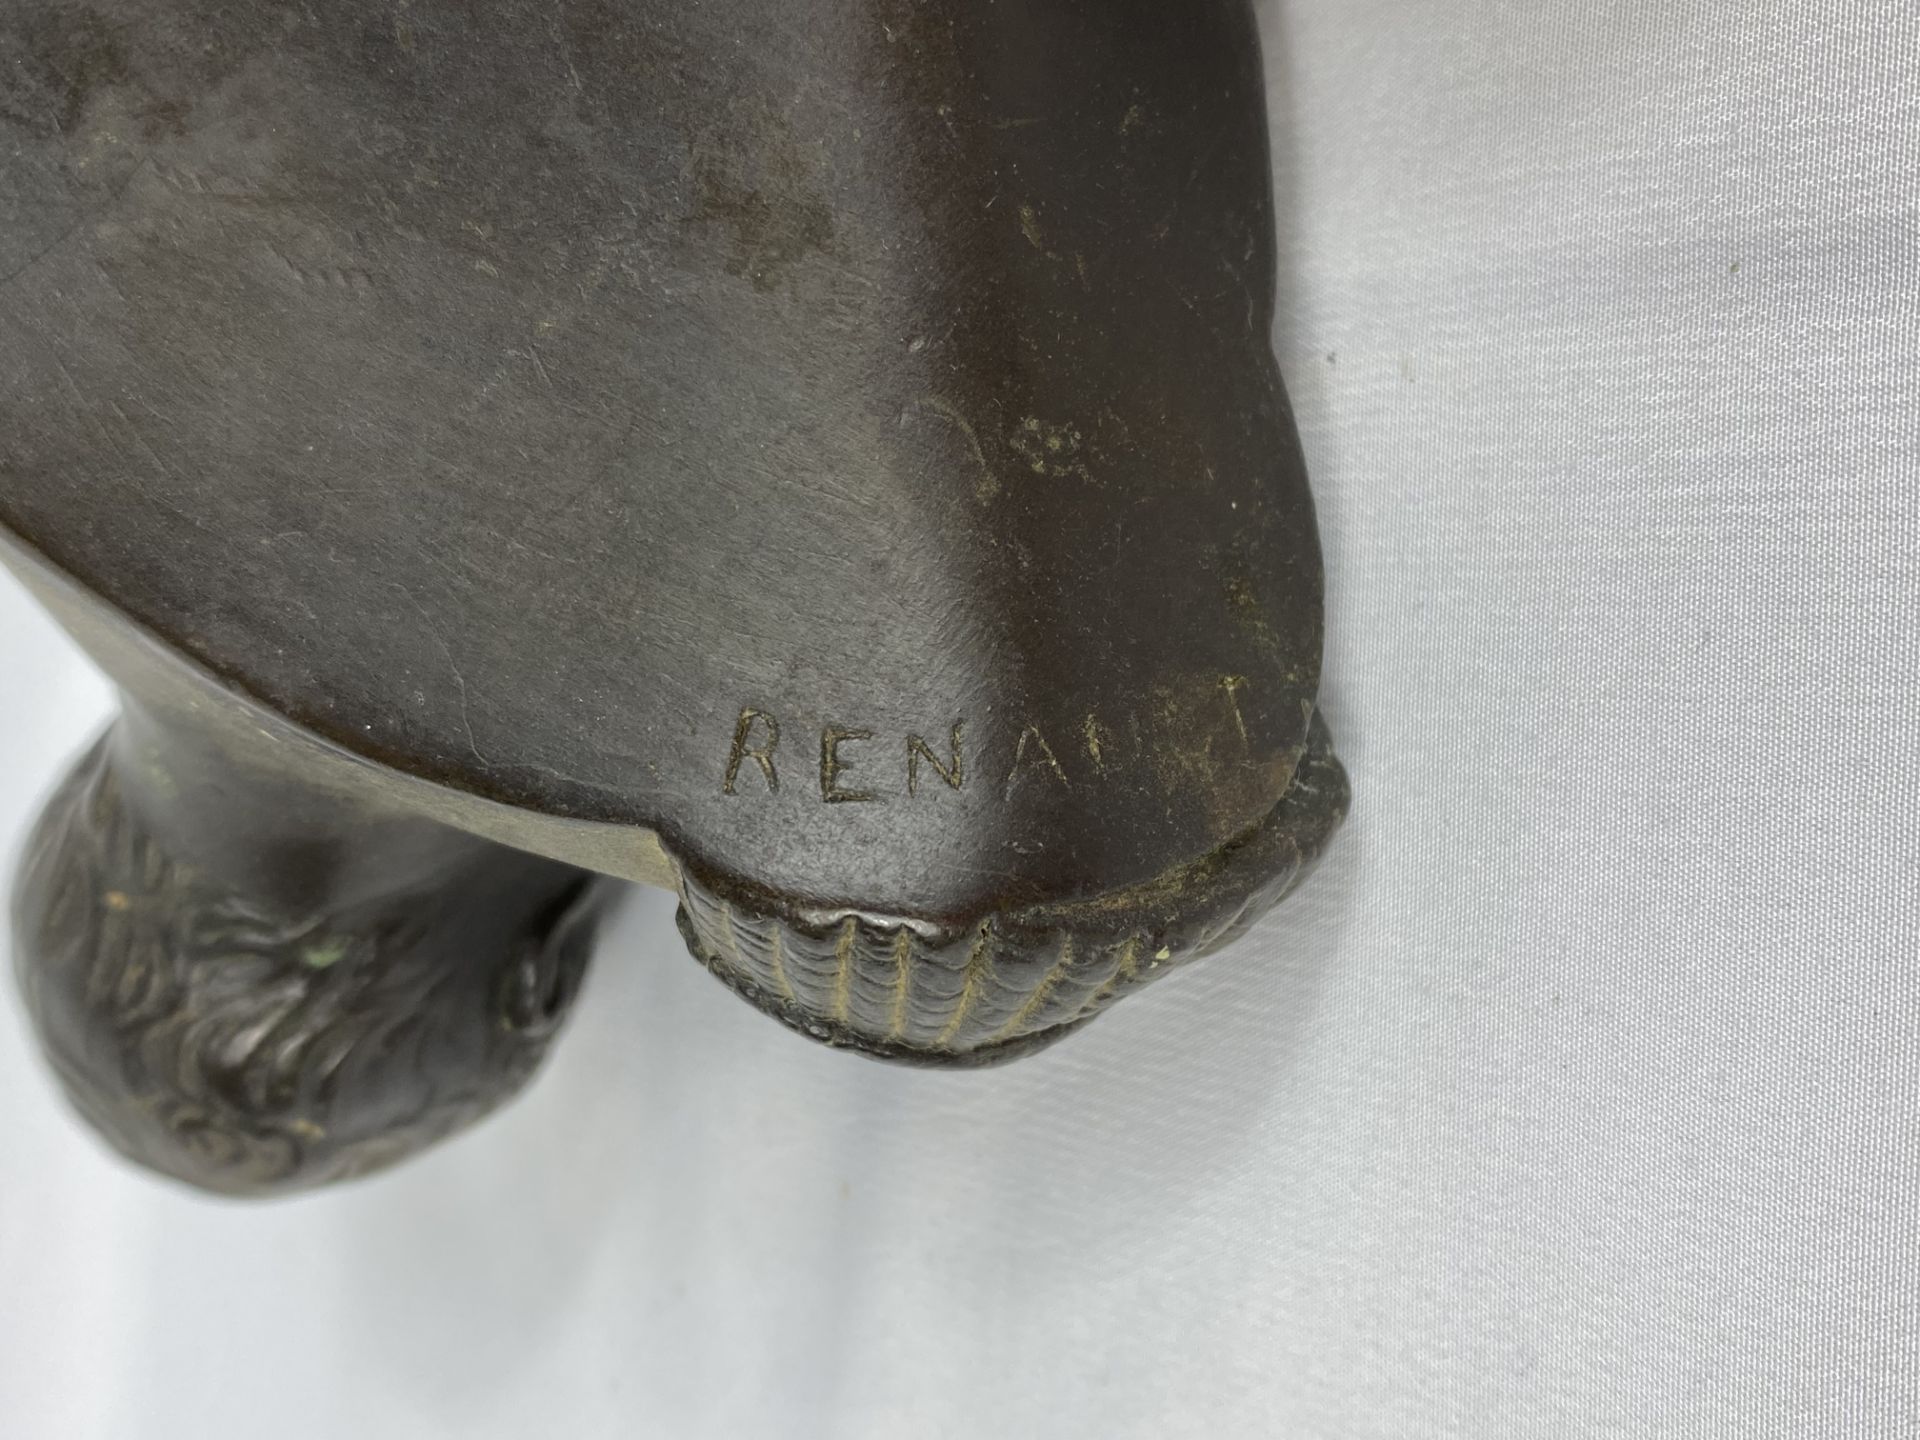 Bronzed bust of Napoleon on marble base, signed Renault. From the Estate of Dame Mary Quant - Image 4 of 4